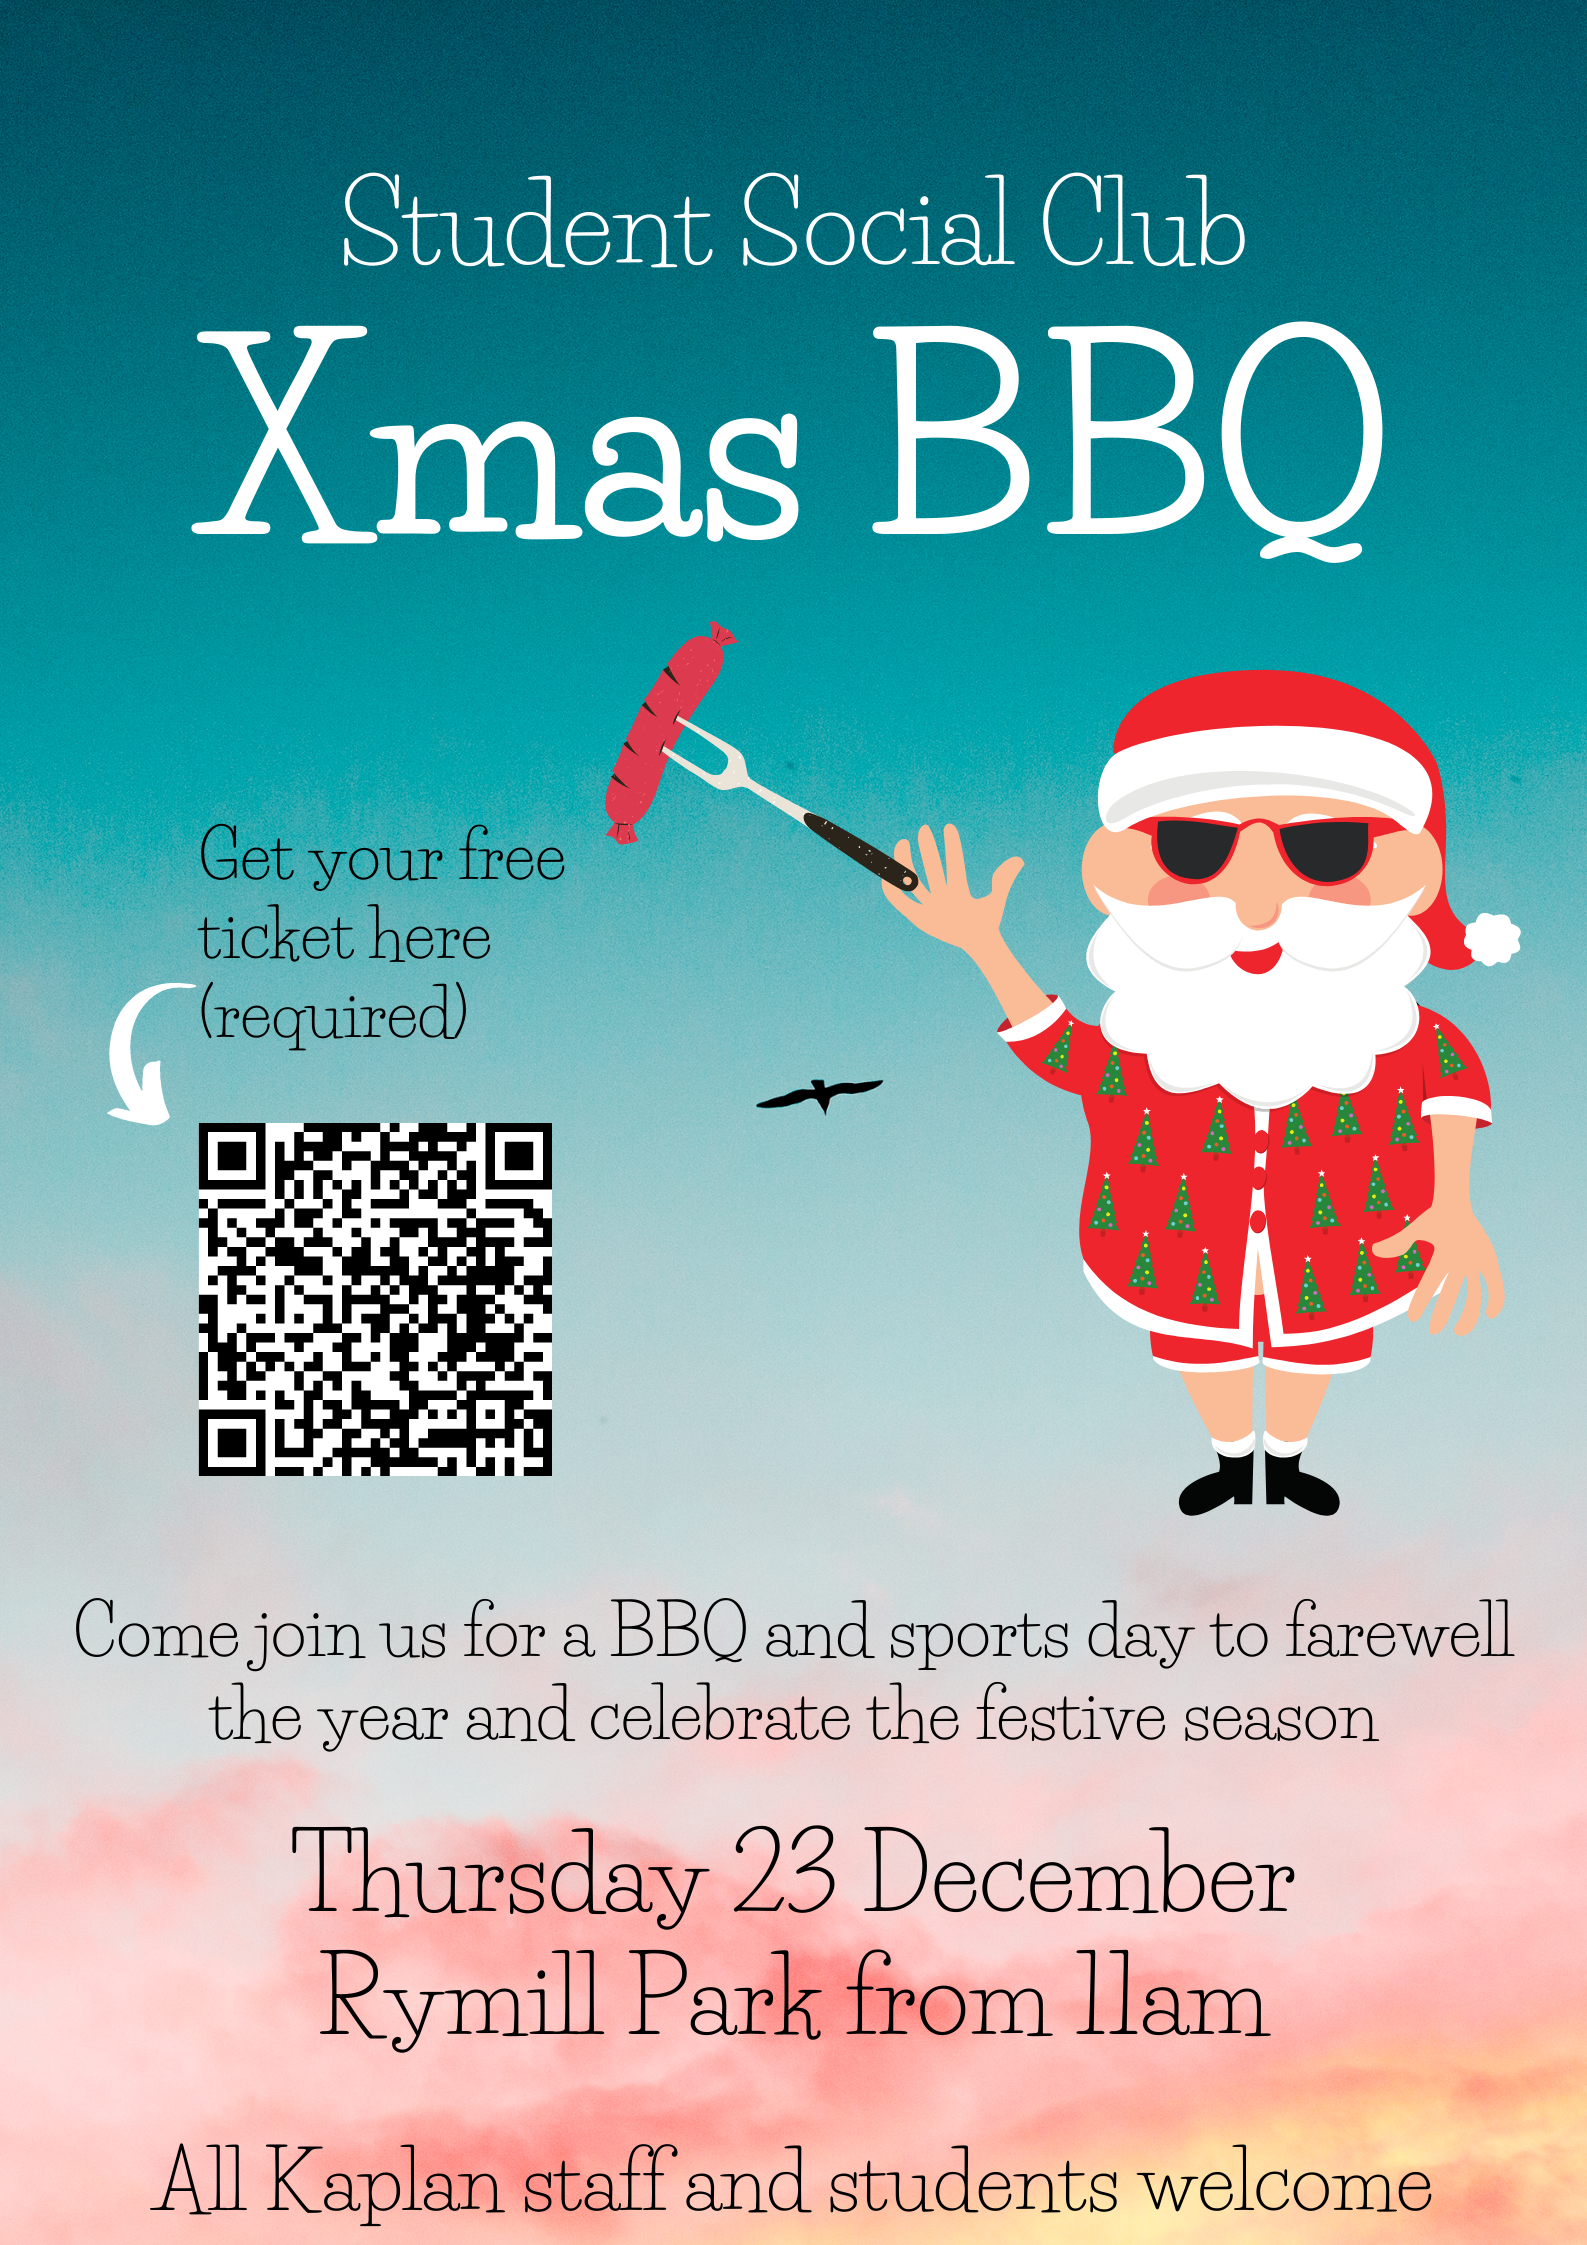 Attachment Xmas BBQ 2021.png